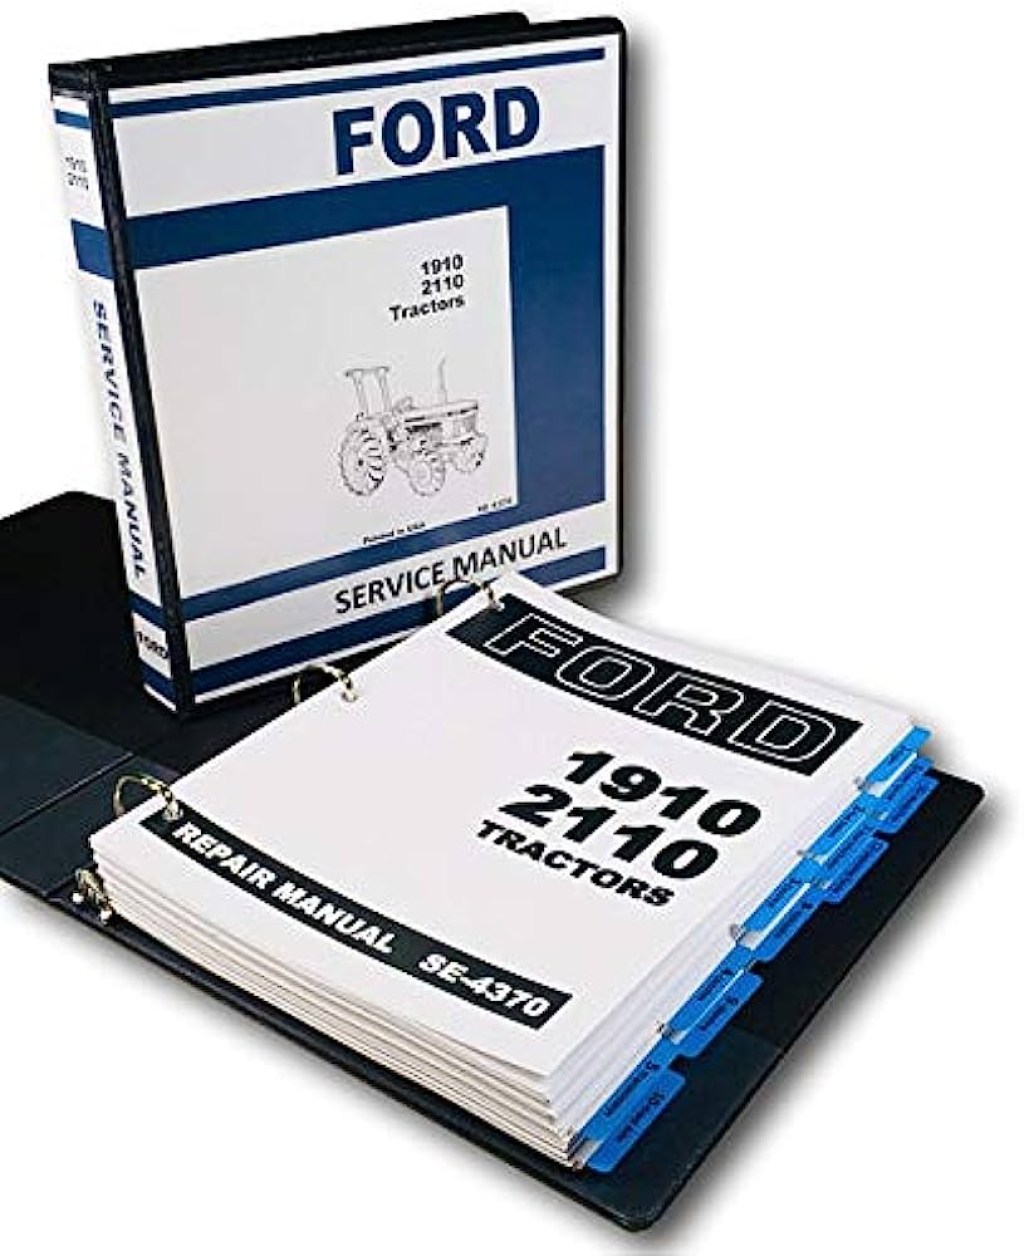 Picture of: Service Manual for Ford   Compact Tractors Repair Technical Shop  Book